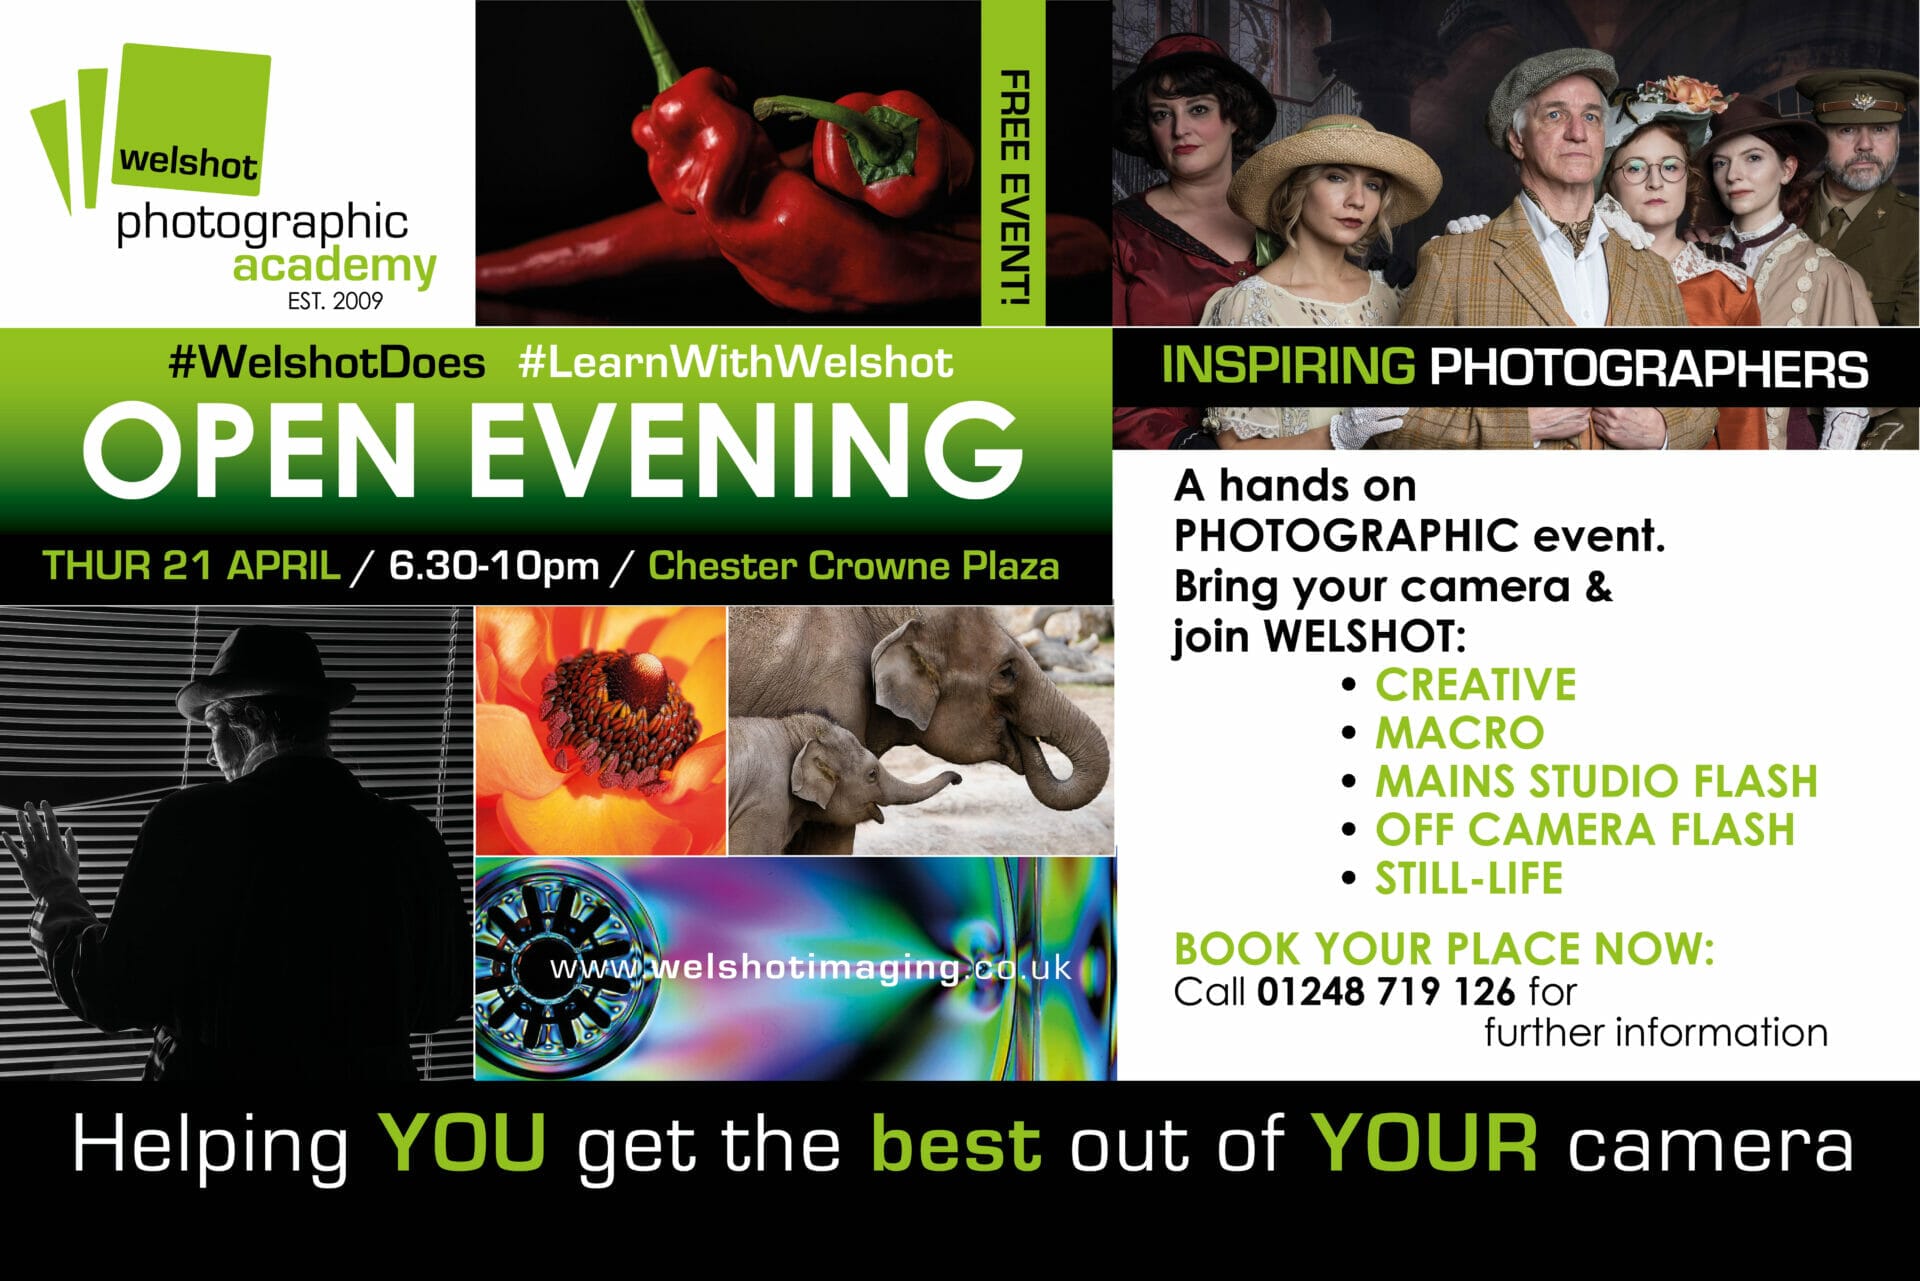 An image graphic advertising An Open Evening With The Welshot Photographic Academy - Features photos of flowers, people red peppers and elephants